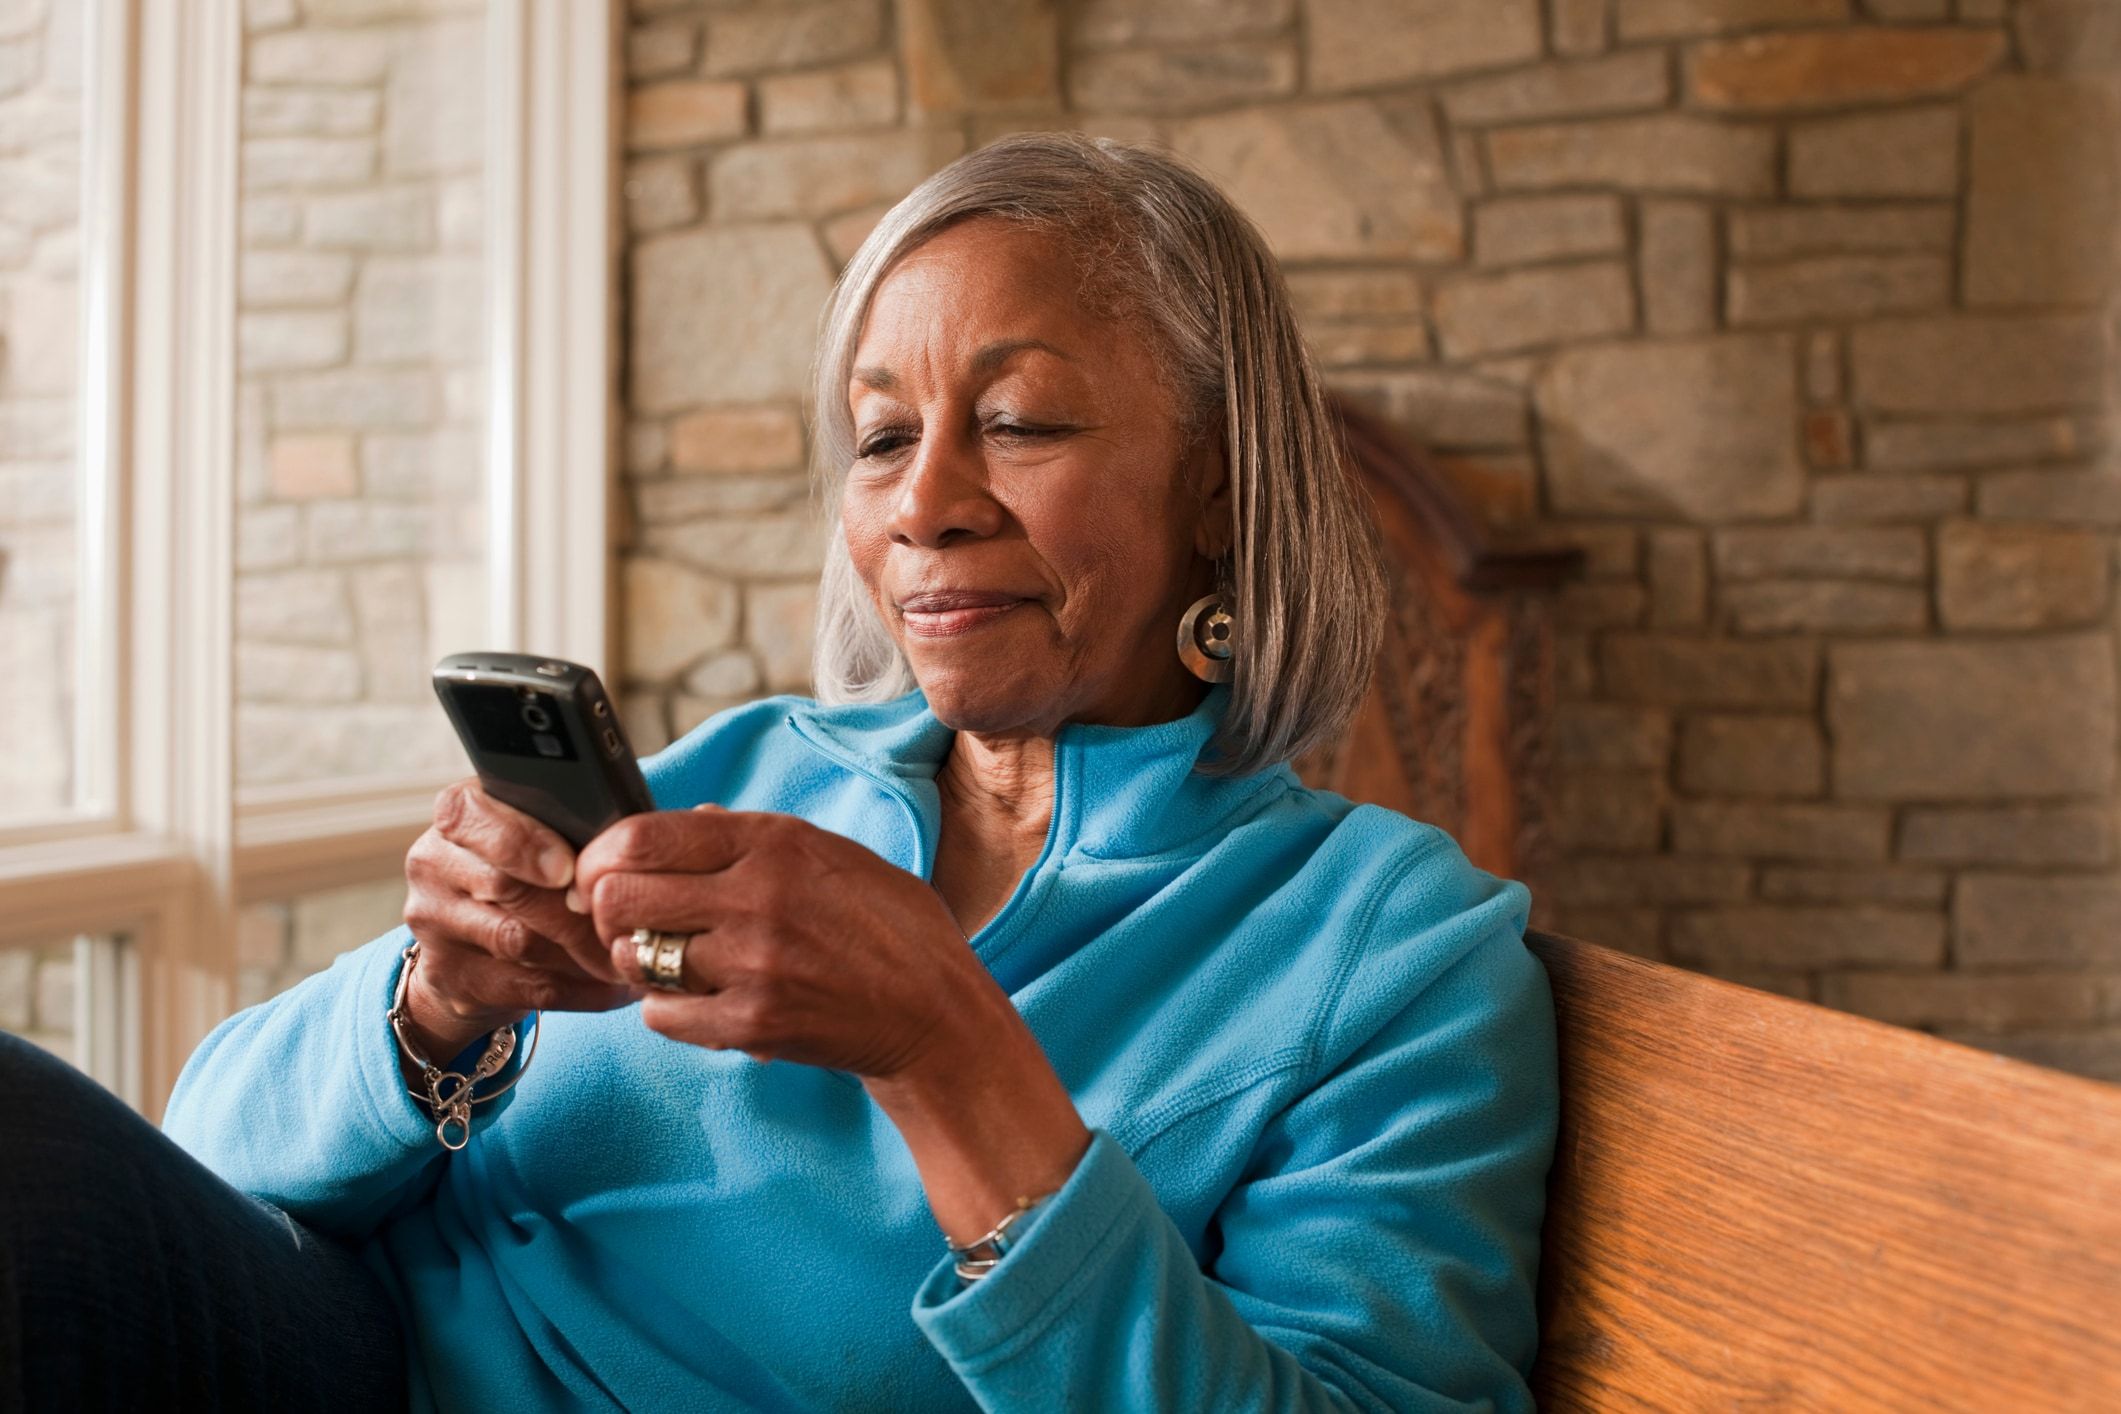 Health apps and gadgets for seniors